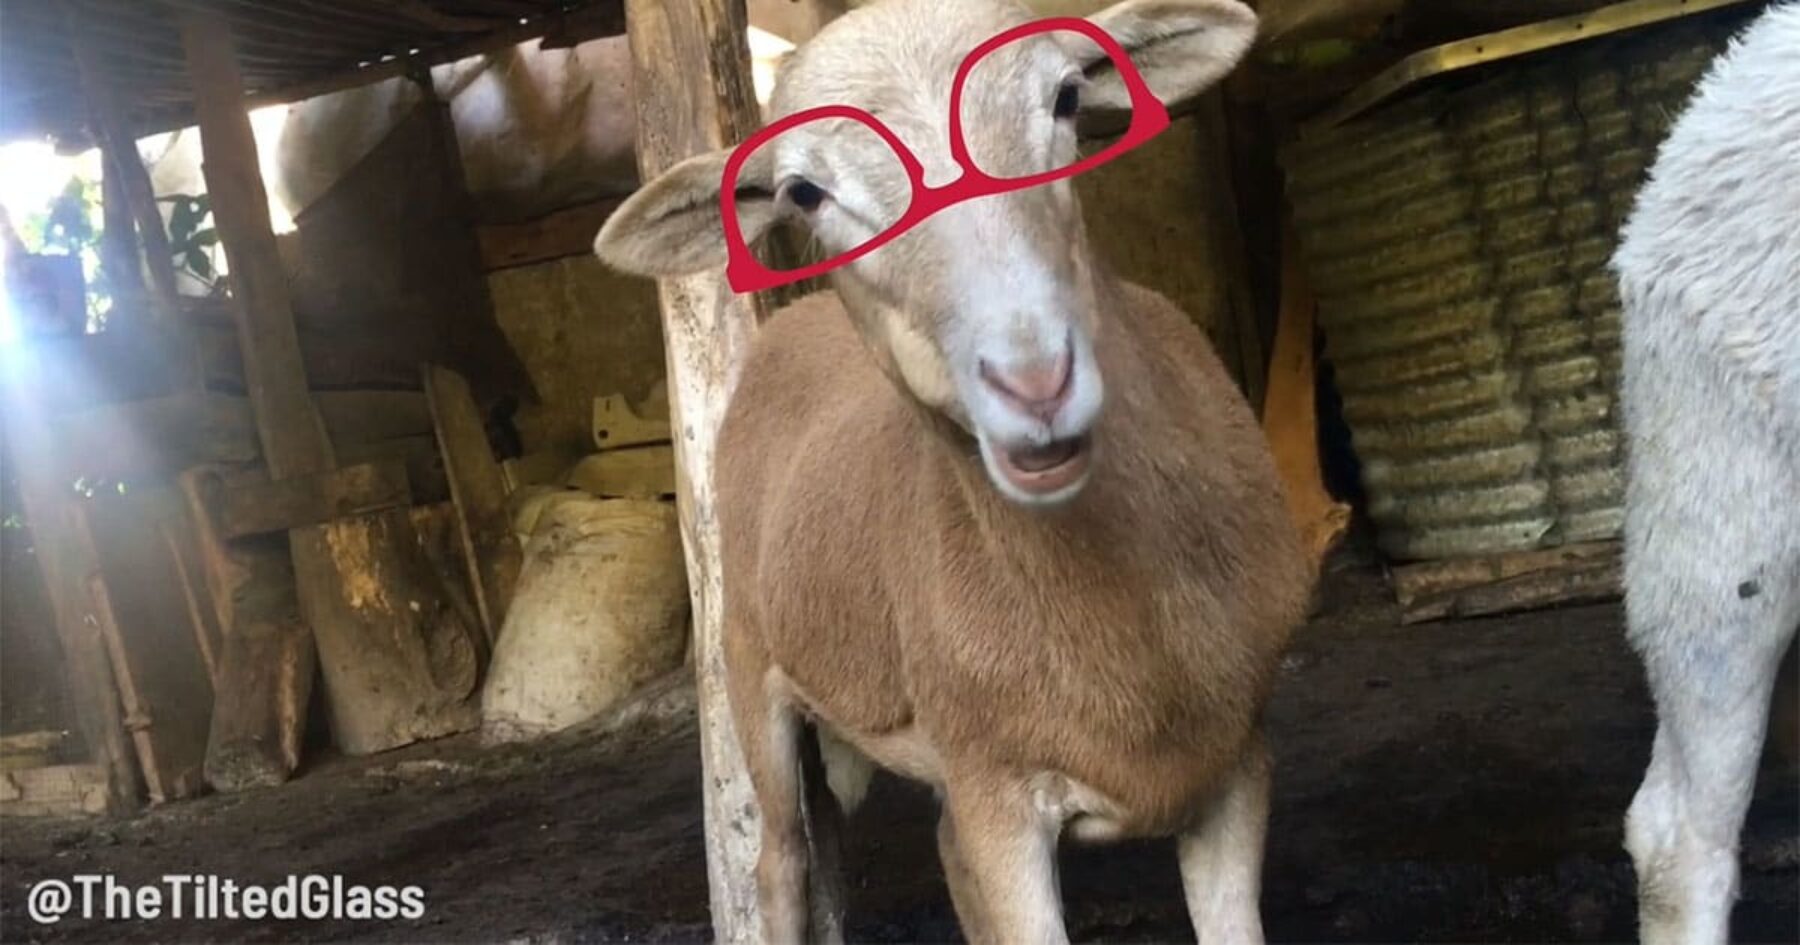 Video: Here now is a goat wearing sunglasses, chewing and staring into your heart.